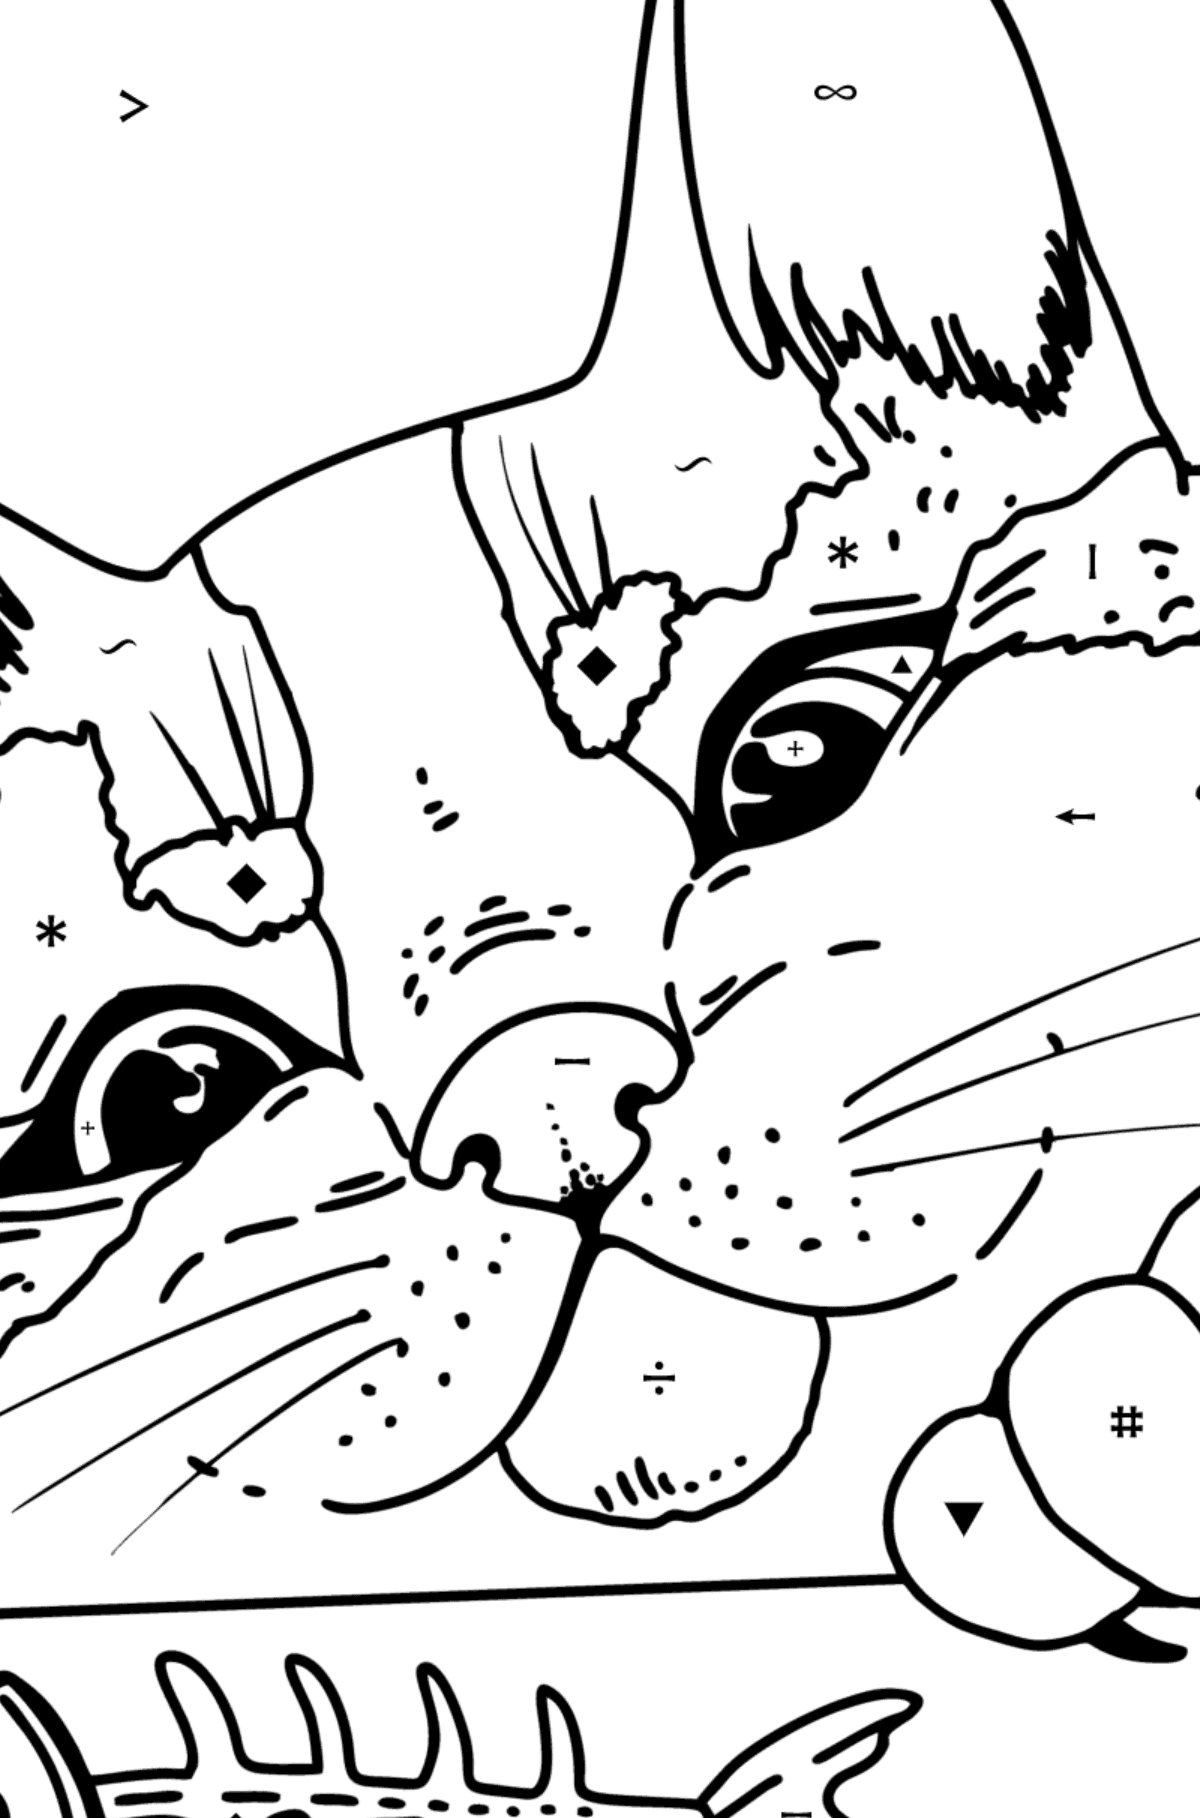 Cat Head coloring page - Coloring by Symbols for Kids